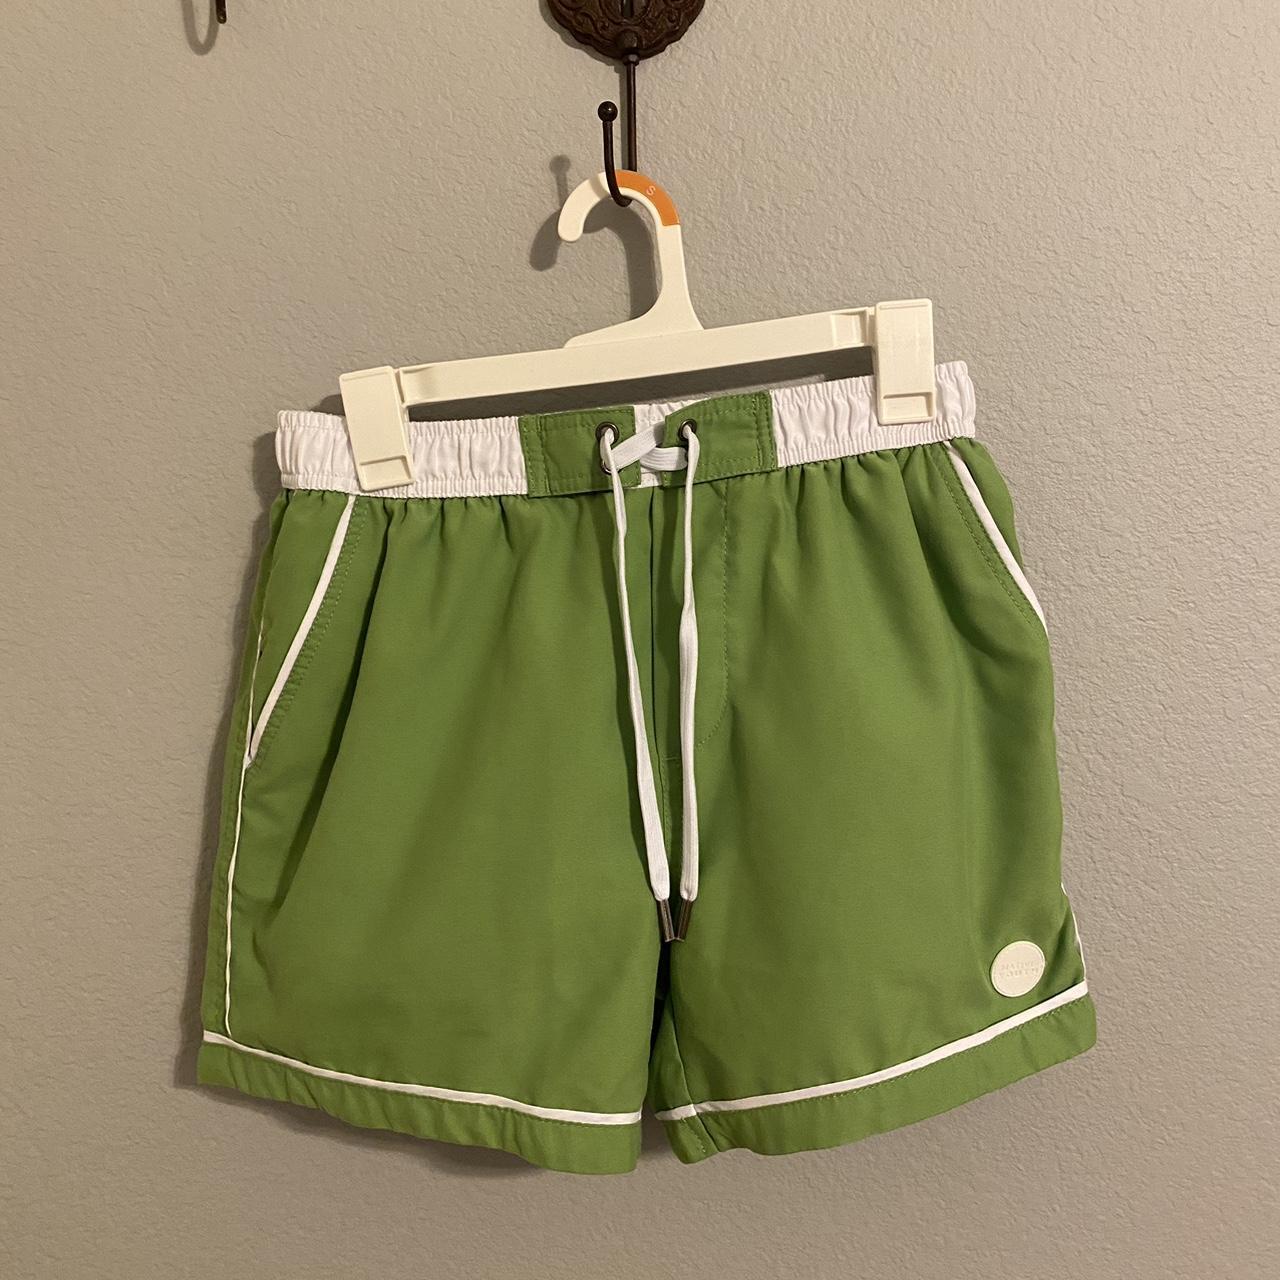 Native Youth Men's Green and White Swim-briefs-shorts (4)